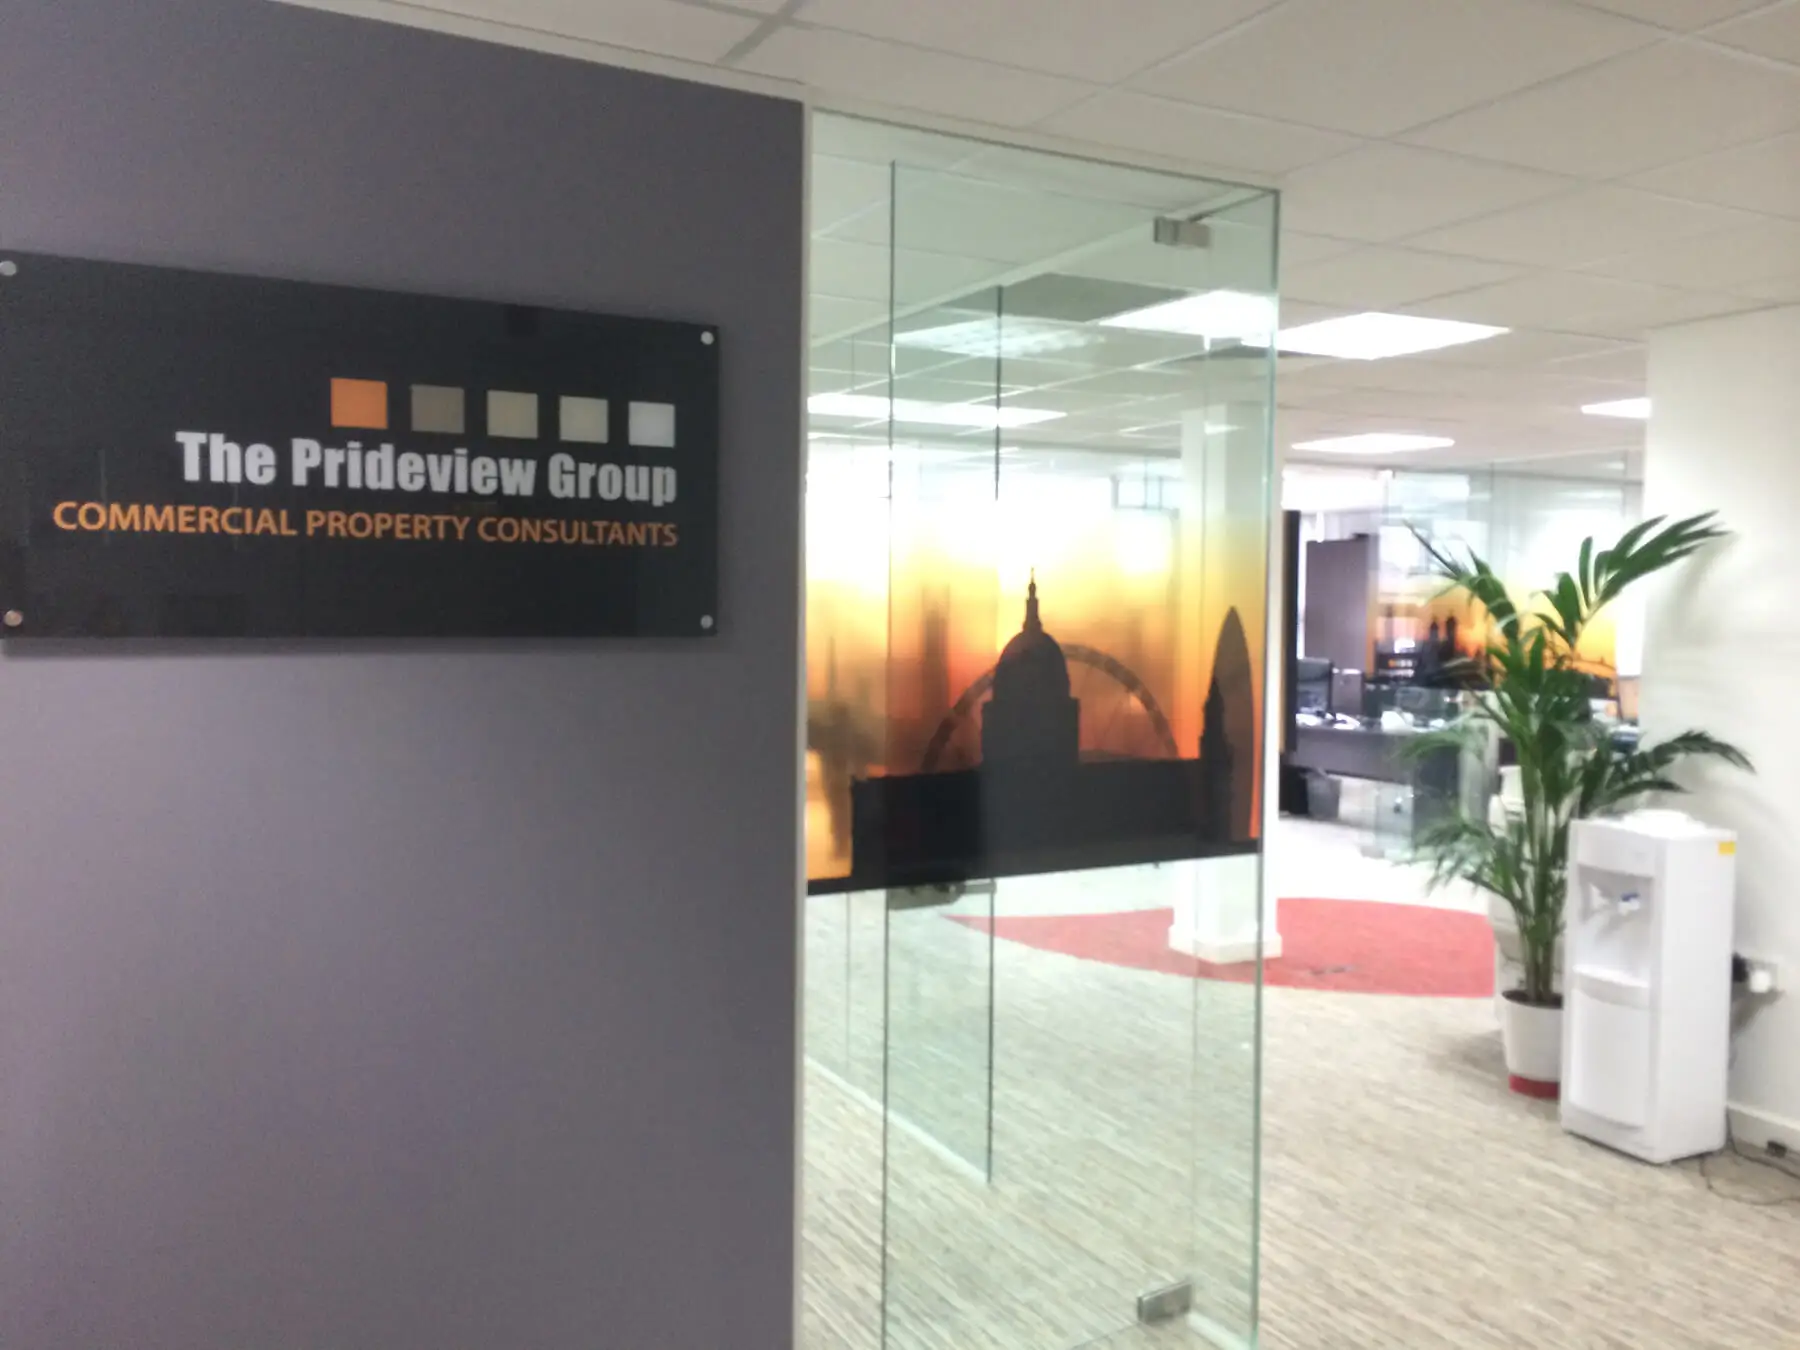 Office space with glass partitions planters and logo design